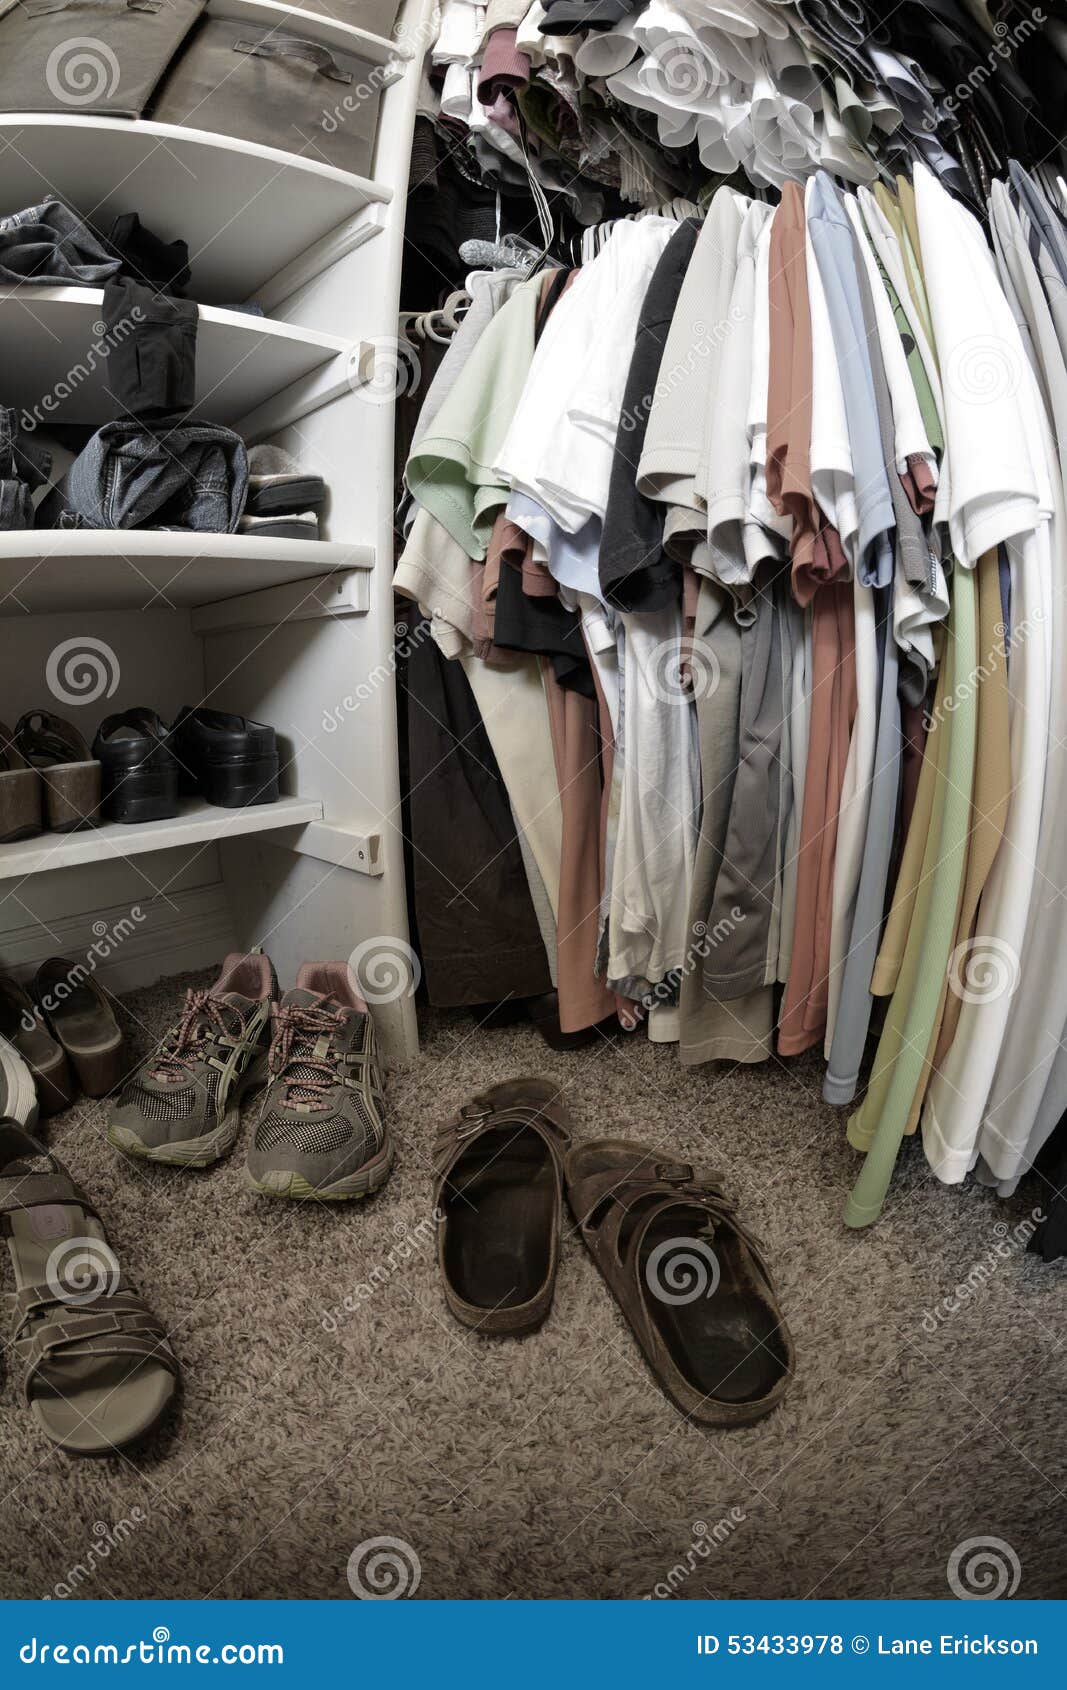 messy closet in house with clothes and shoes